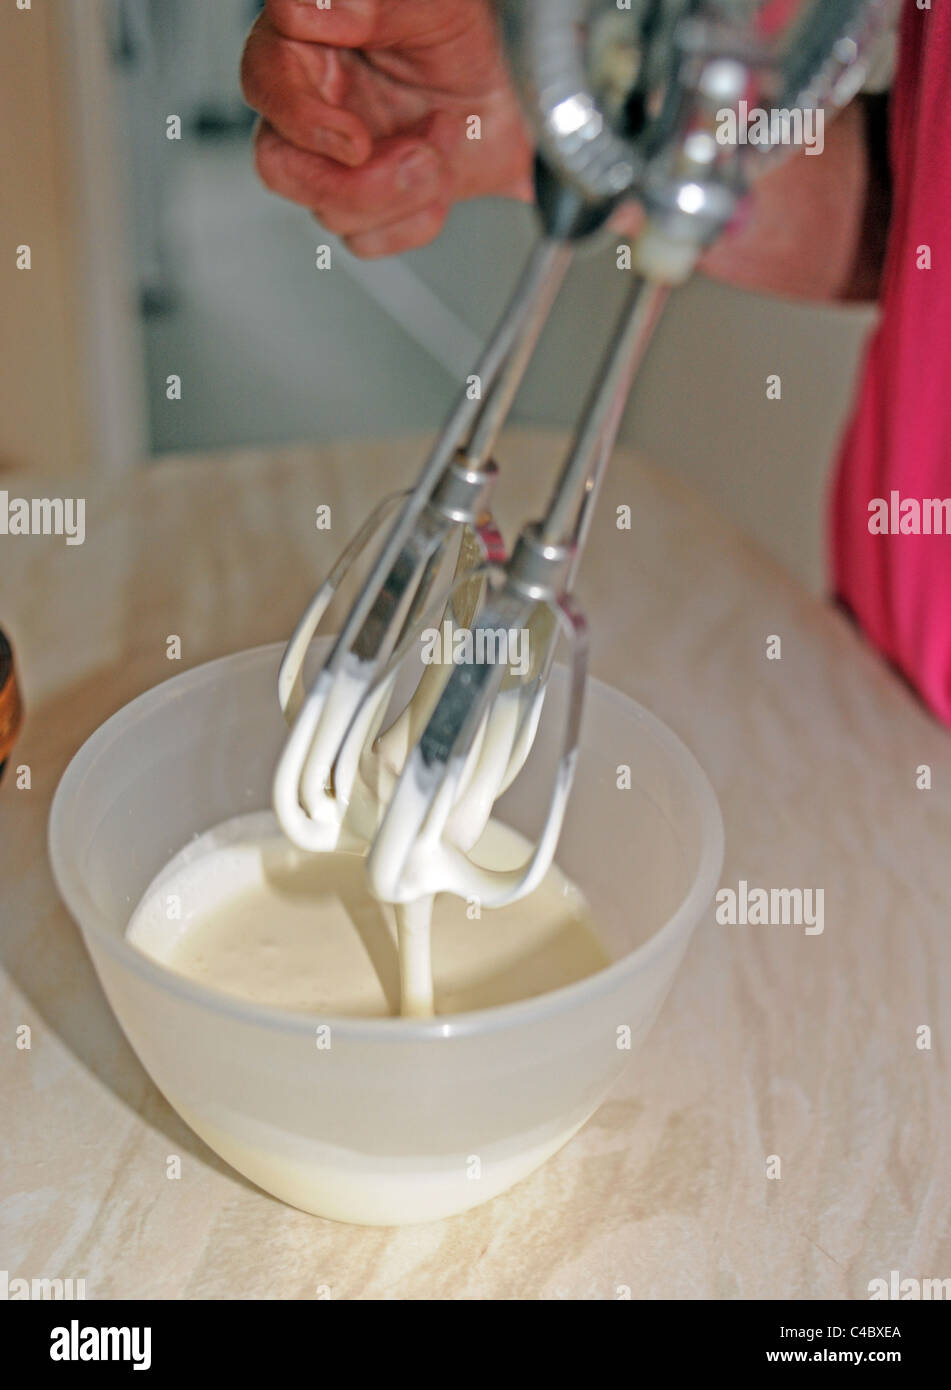 https://c8.alamy.com/comp/C4BXEA/woman-using-an-old-fashioned-hand-whisk-in-a-bowl-of-cream-in-kitchen-C4BXEA.jpg